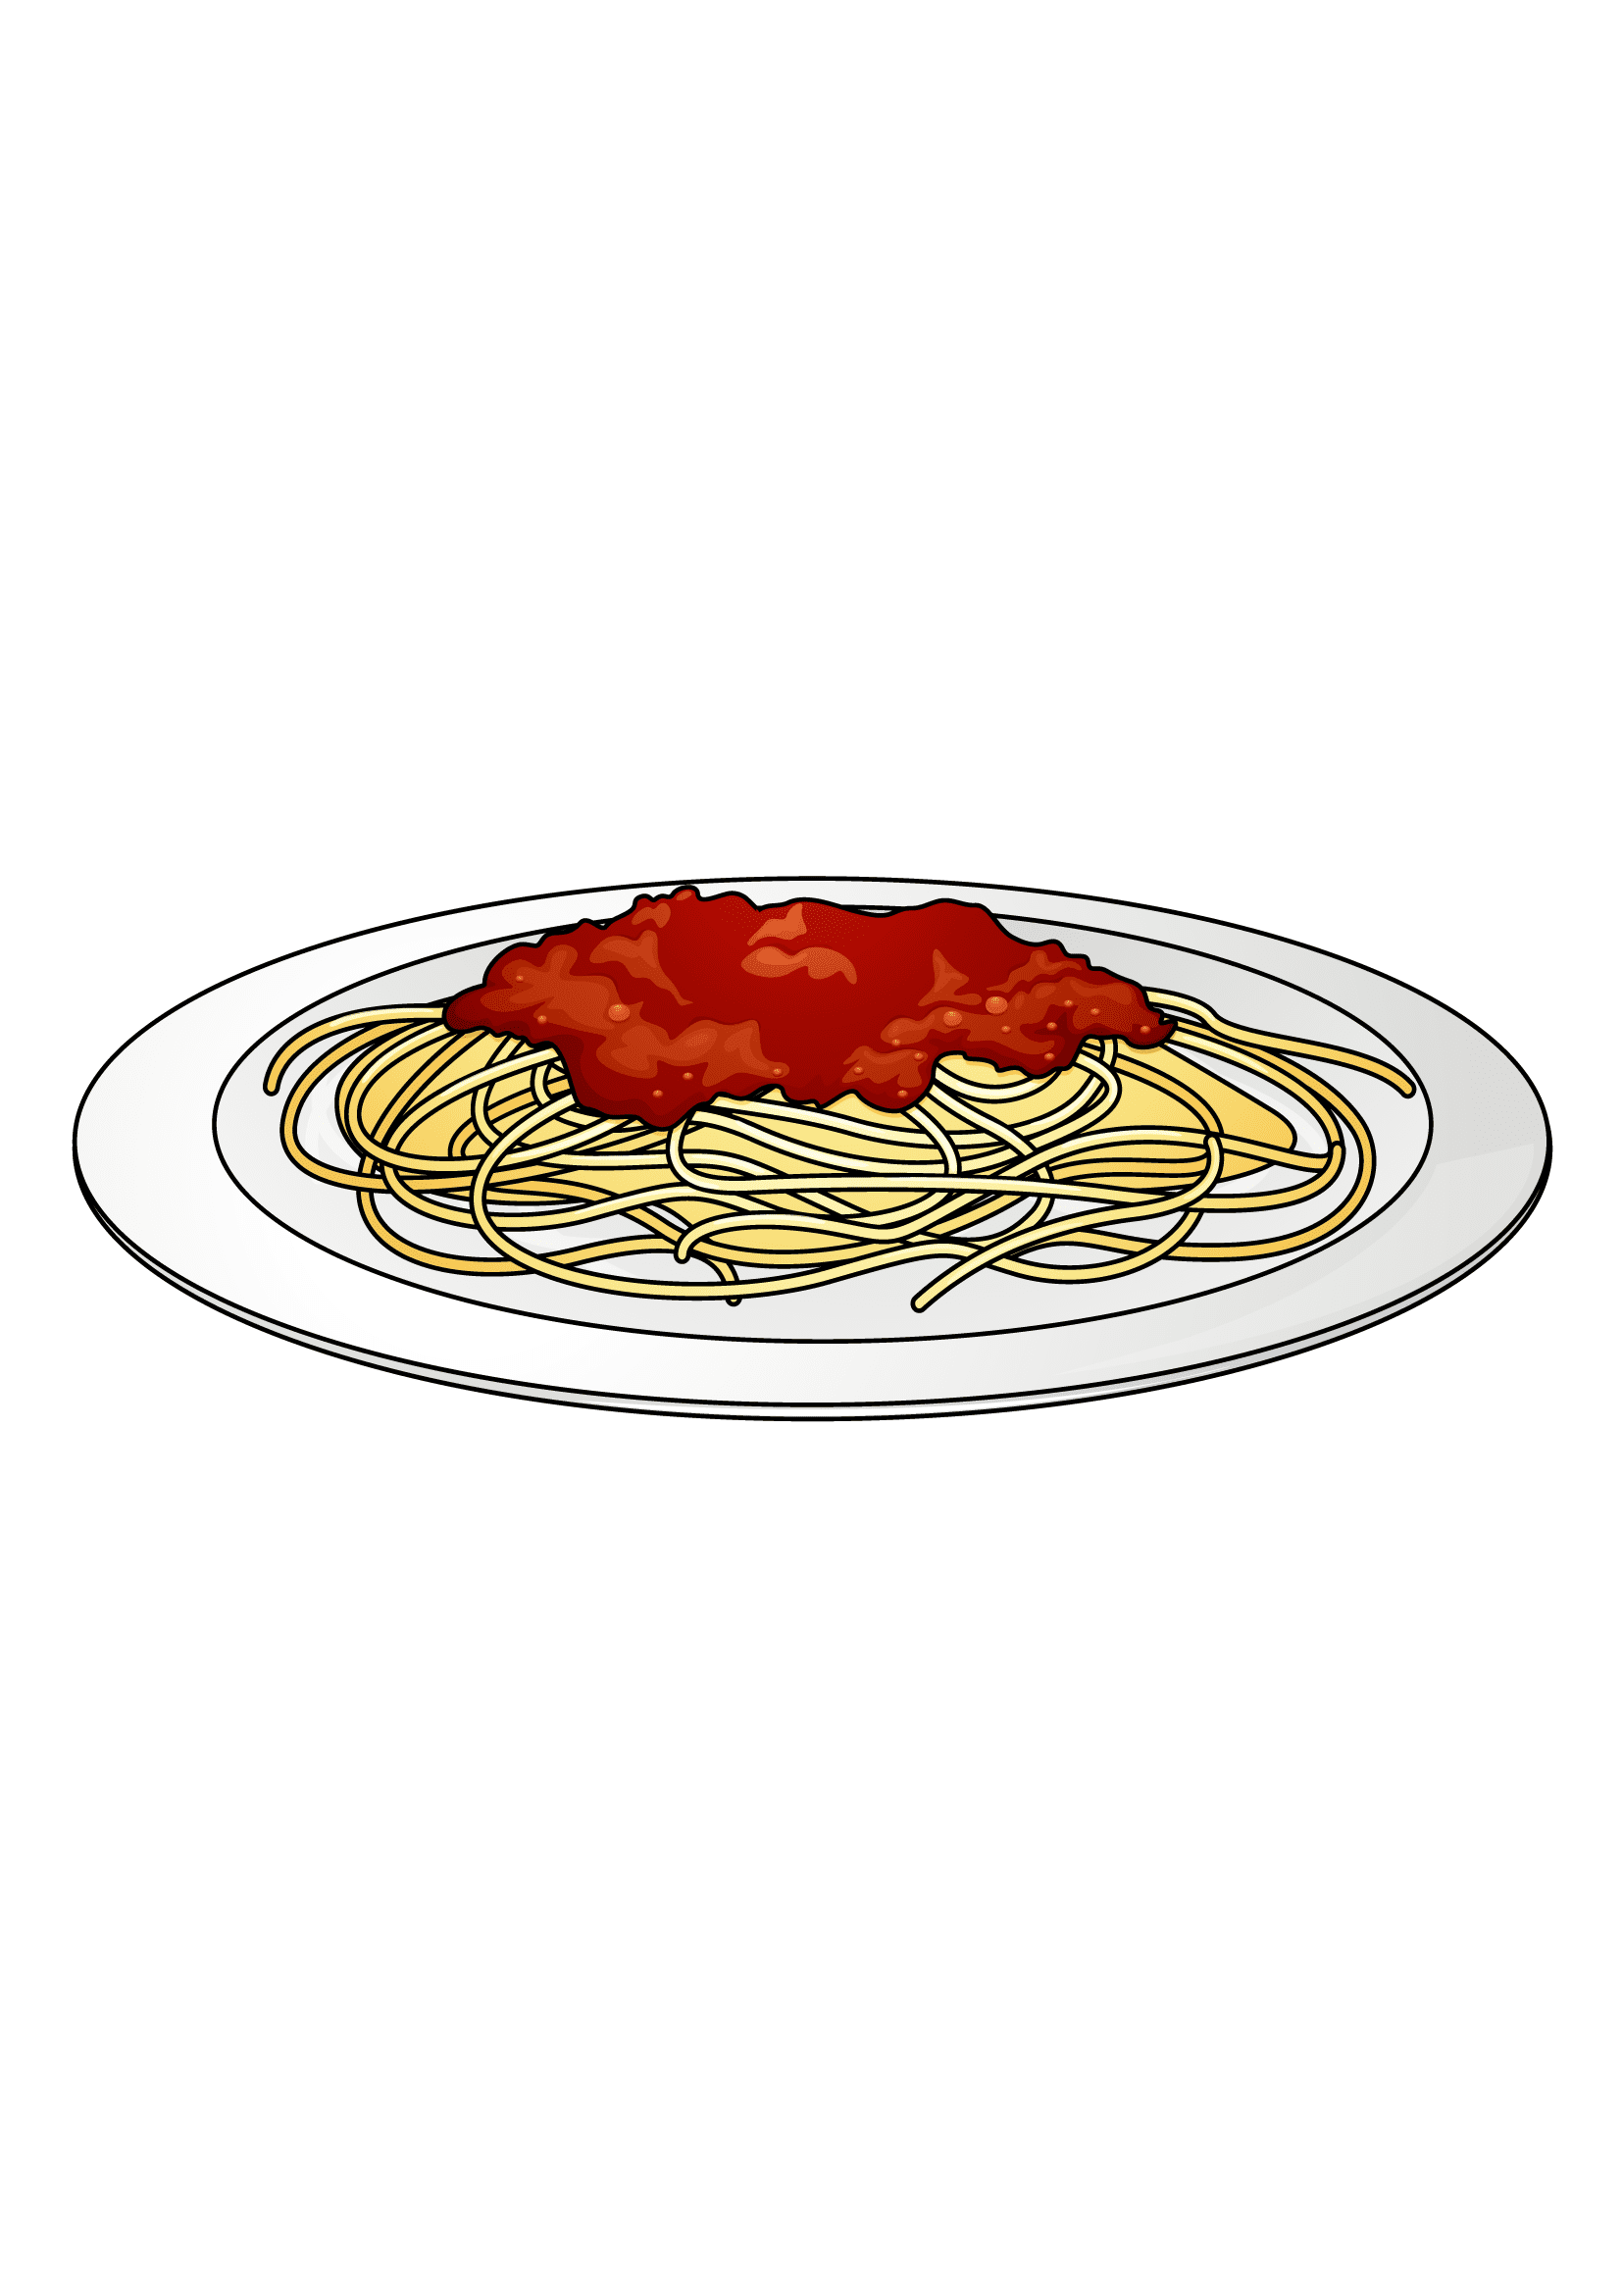 How to Draw Spaghetti Step by Step